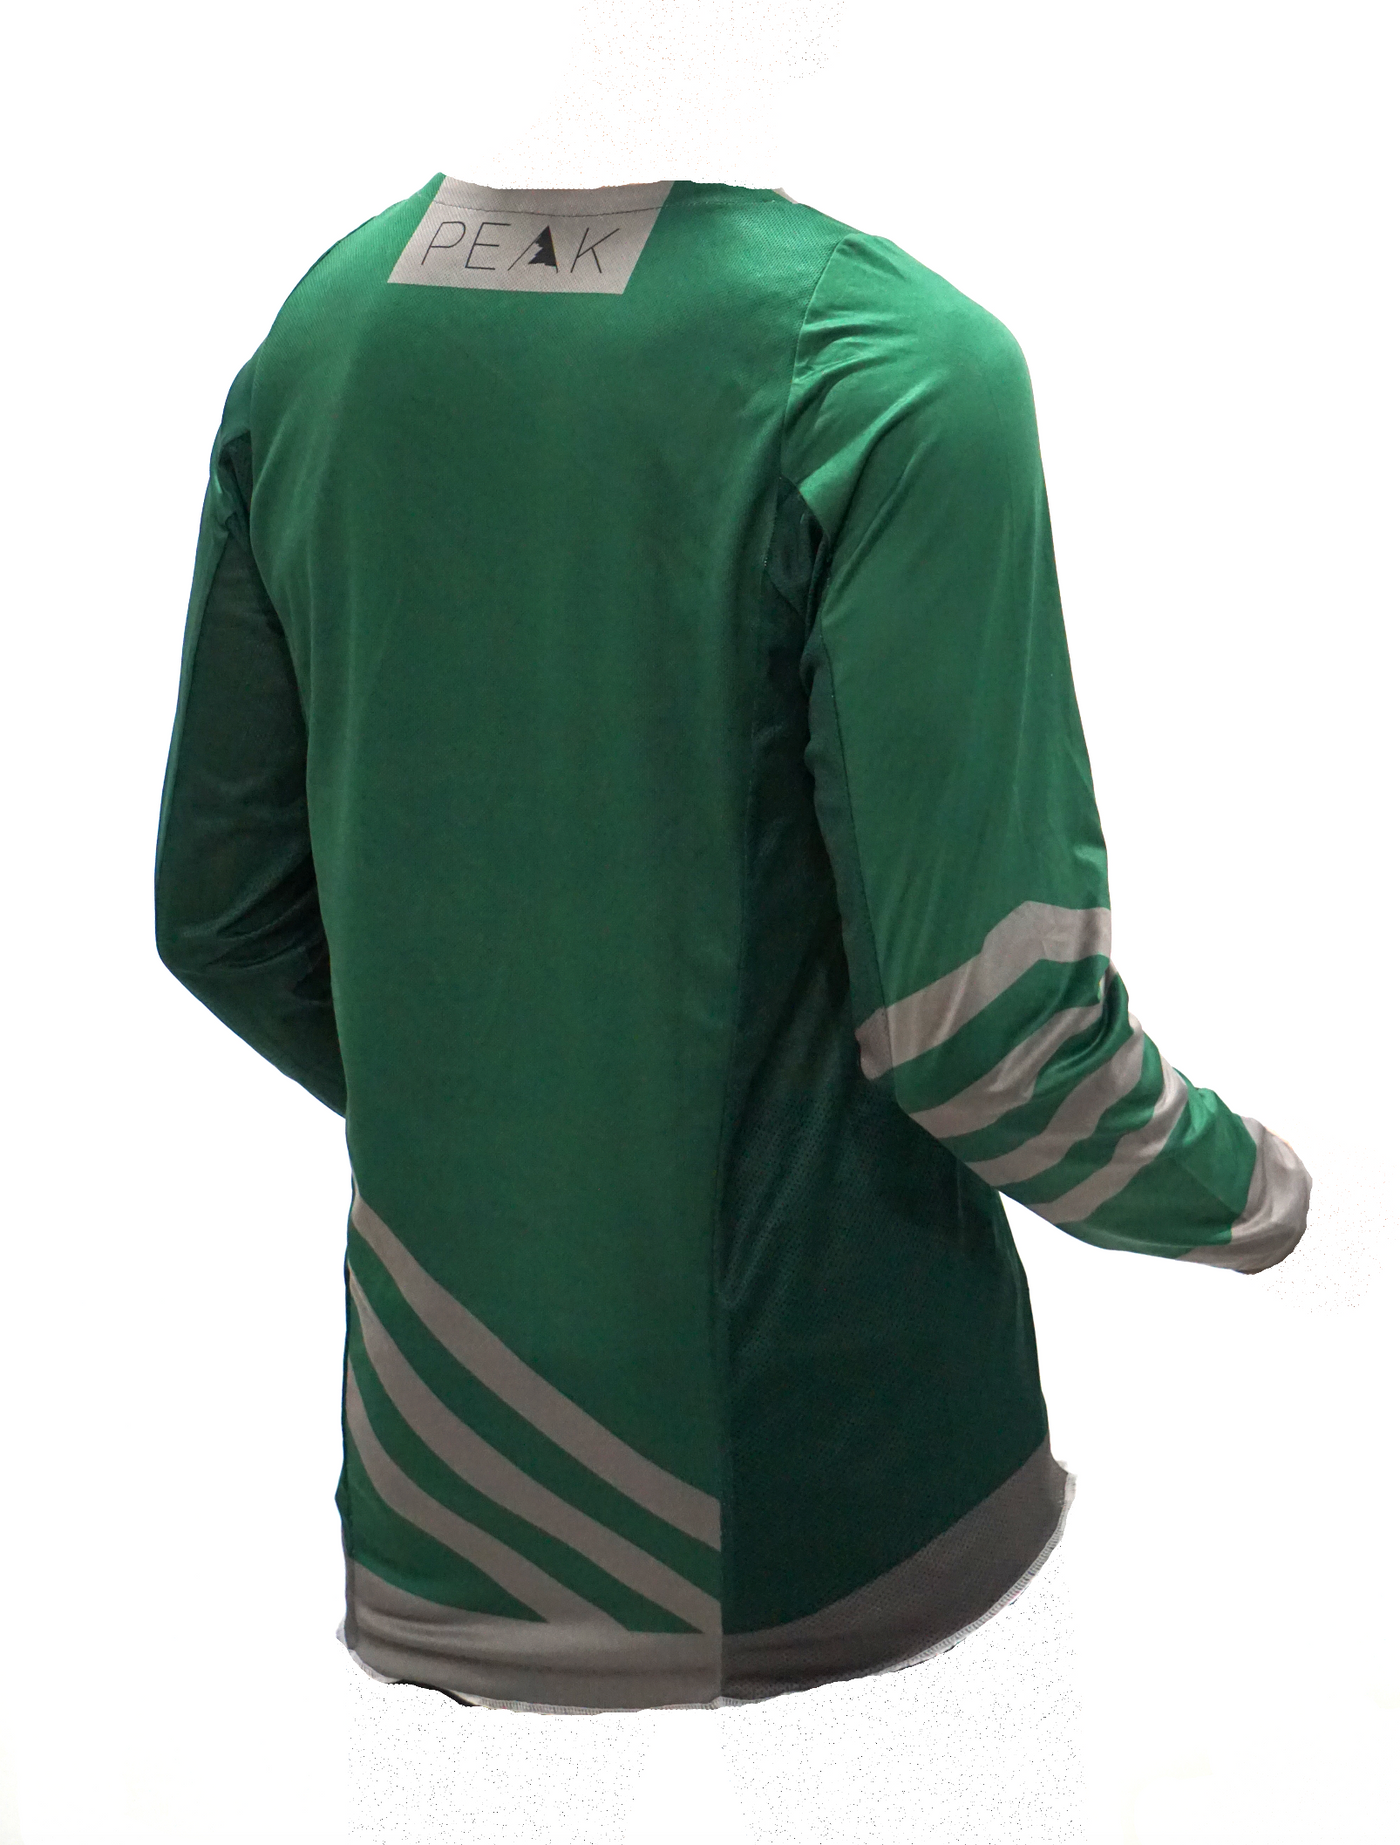 Jersey Mx 22 - Green and Gray